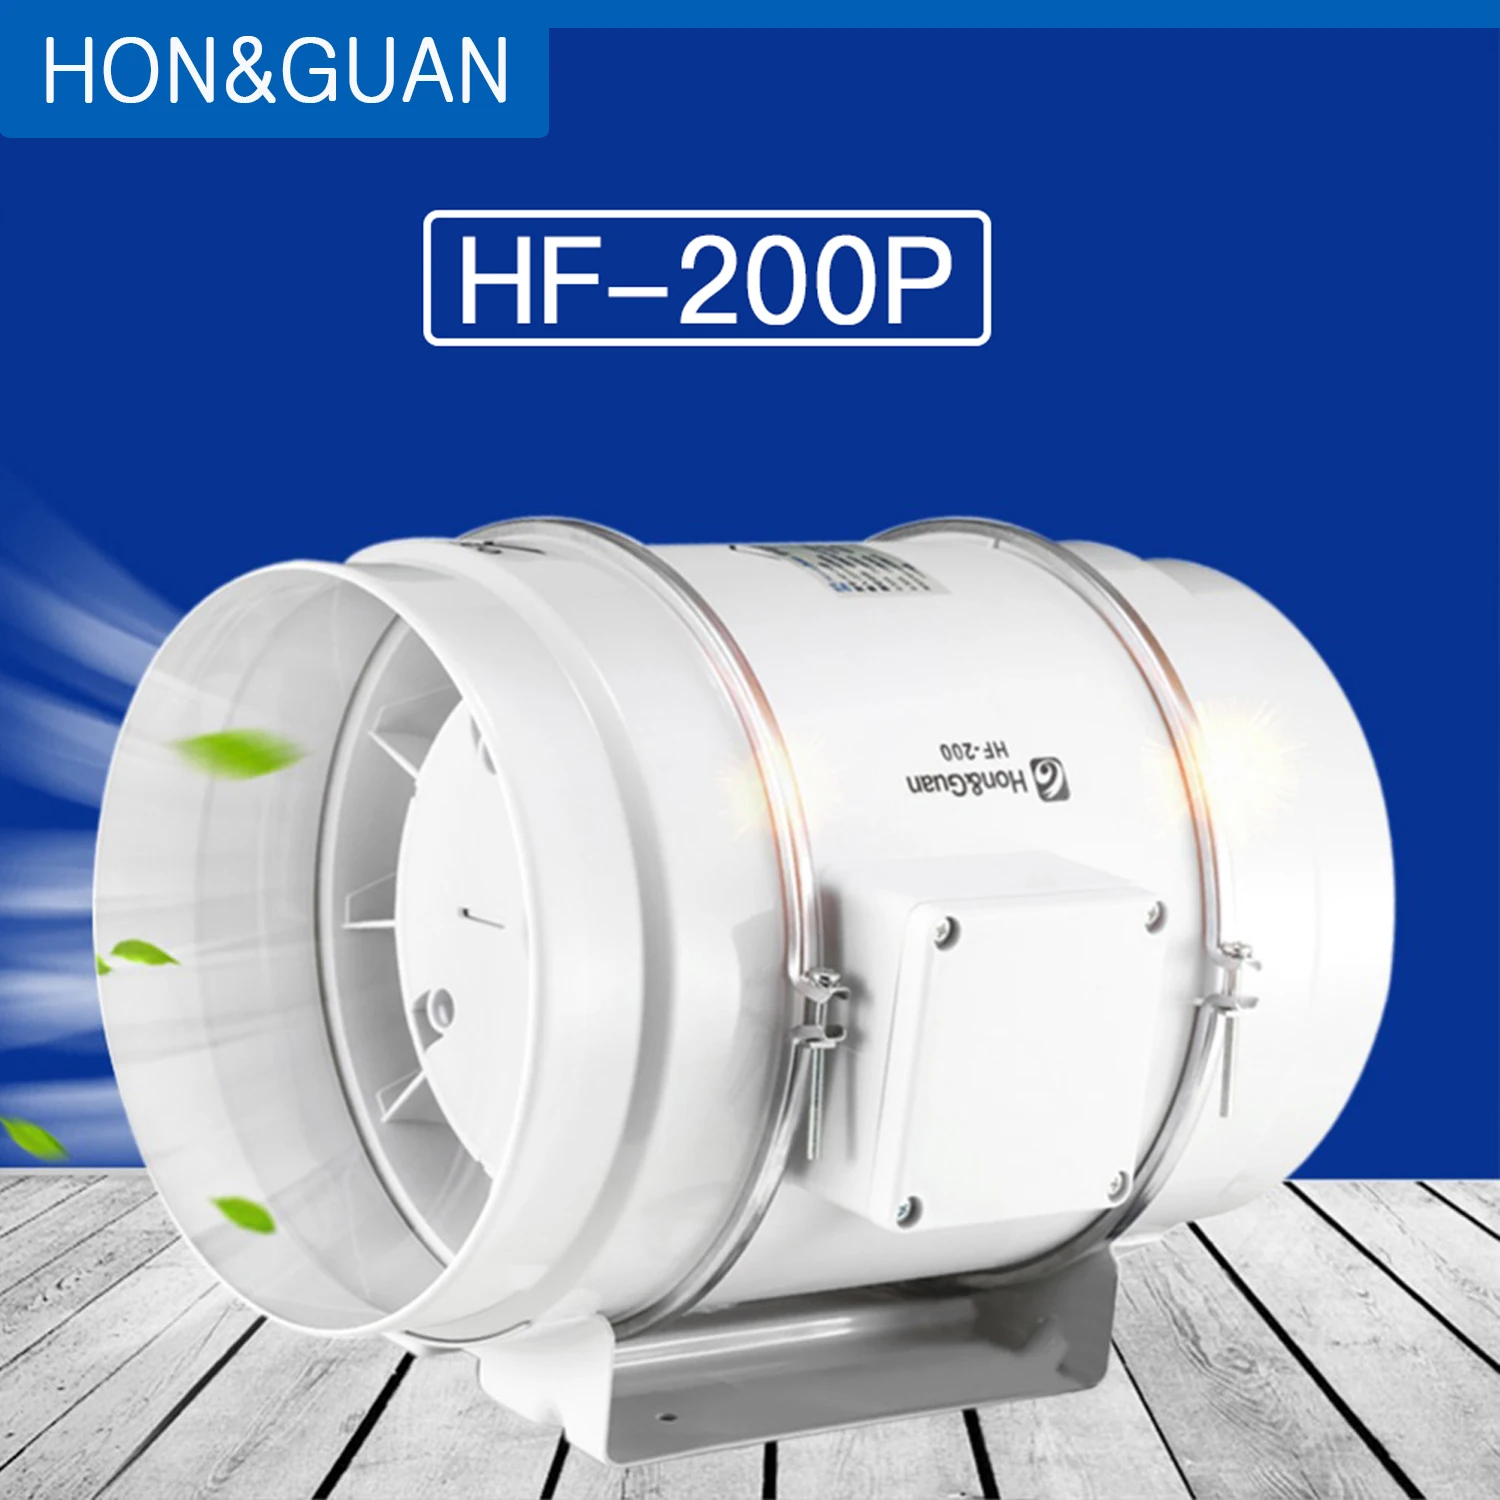 Hon&Guan 8'' Home Inline Duct Fan for Bathroom Office Hotel Strong Mixed Flow Ventilation System Air Extractor Fan Ventilation